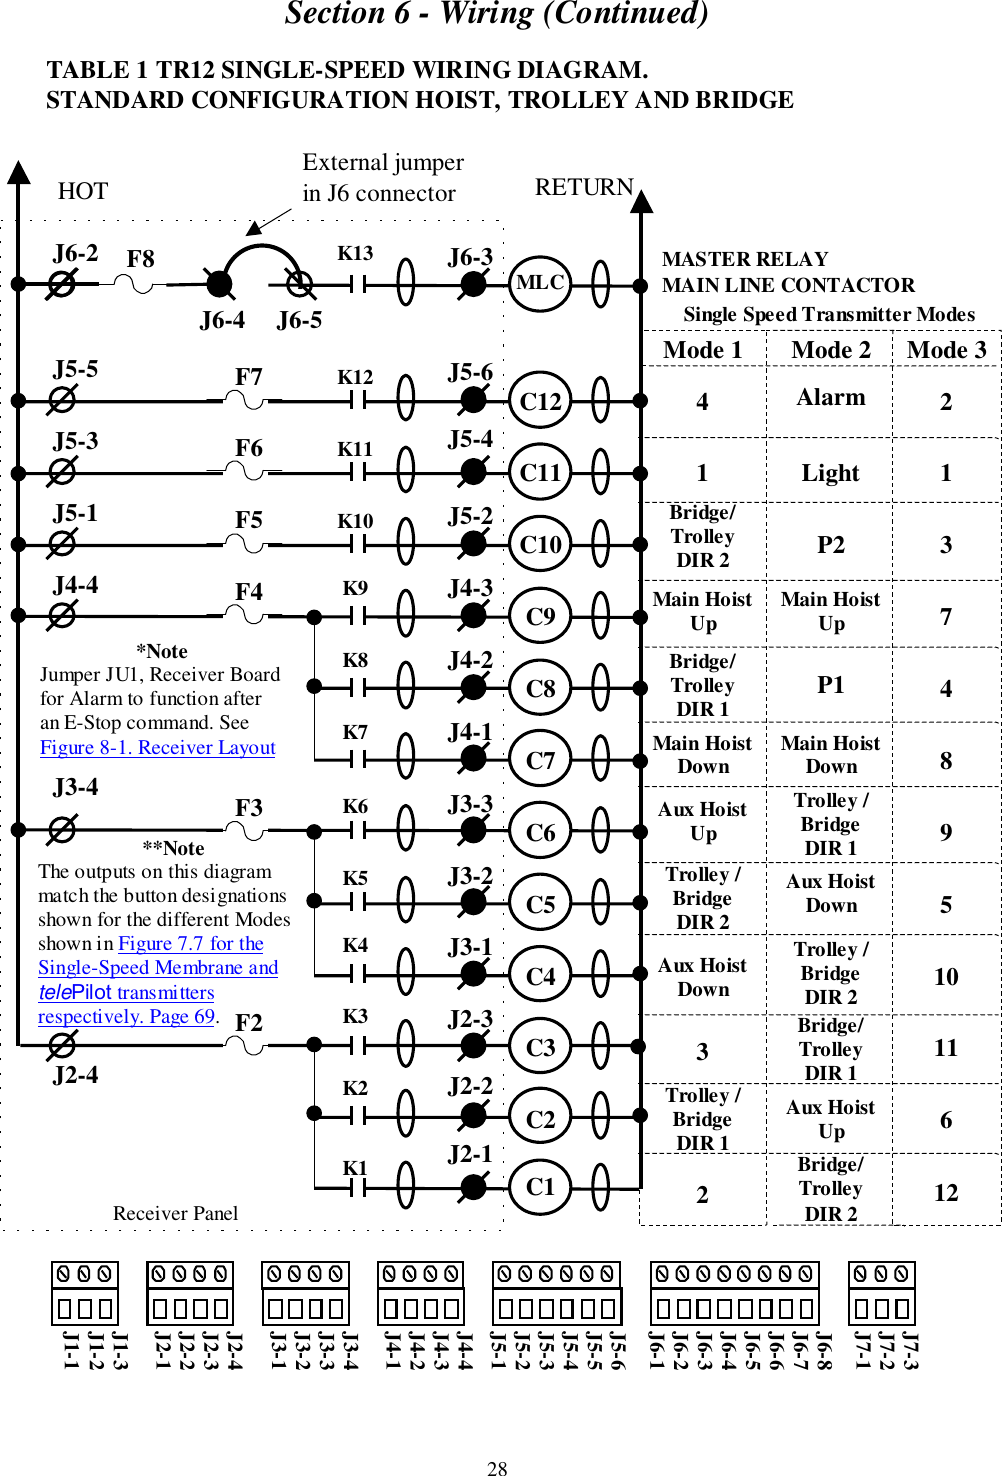 Section 6 - Wiring (Continued)28TABLE 1 TR12 SINGLE-SPEED WIRING DIAGRAM.STANDARD CONFIGURATION HOIST, TROLLEY AND BRIDGEMASTER RELAYMAIN LINE CONTACTOR     Receiver PanelJ6-2J5-5J5-3J5-1J4-4J3-4J2-4J6-3J5-6J5-4J5-2J4-3J4-2J4-1J3-3J3-2J3-1J2-3J2-2J2-1HOT RETURNK13K12K11K10K9K8K7K6K5K4K3K2K1MLCC12C11C10C9C8C7C6C5C4C3C2C1F7F6F5F4F3F2J7-3J7-2J7-1J6-8J6-7J6-6J6-5J6-4J6-3J6-2J6-1J5-6J5-5J5-4J5-3J5-2J5-1J4-4J4-3J4-2J4-1J3-4J3-3J3-2J3-1J2-4J2-3J2-2J2-1J1-3J1-2J1-1External jumperin J6 connectorJ6-4     J6-5F8*NoteJumper JU1, Receiver Boardfor Alarm to function afteran E-Stop command. SeeFigure 8-1. Receiver Layout**NoteThe outputs on this diagrammatch the button designationsshown for the different Modesshown in Figure 7.7 for theSingle-Speed Membrane andtelePilot transmittersrespectively. Page 69.Mode 141Bridge/TrolleyDIR 2Main HoistUpBridge/TrolleyDIR 1Main HoistDownAux HoistUpTrolley /BridgeDIR 2Aux HoistDown3Trolley /BridgeDIR 12Mode 2AlarmLightP2Main HoistUpP1Main HoistDownTrolley /BridgeDIR 1Aux HoistDownTrolley /BridgeDIR 2Bridge/TrolleyDIR 1Aux HoistUpBridge/TrolleyDIR 2Mode 3213748951011612Single Speed Transmitter Modes